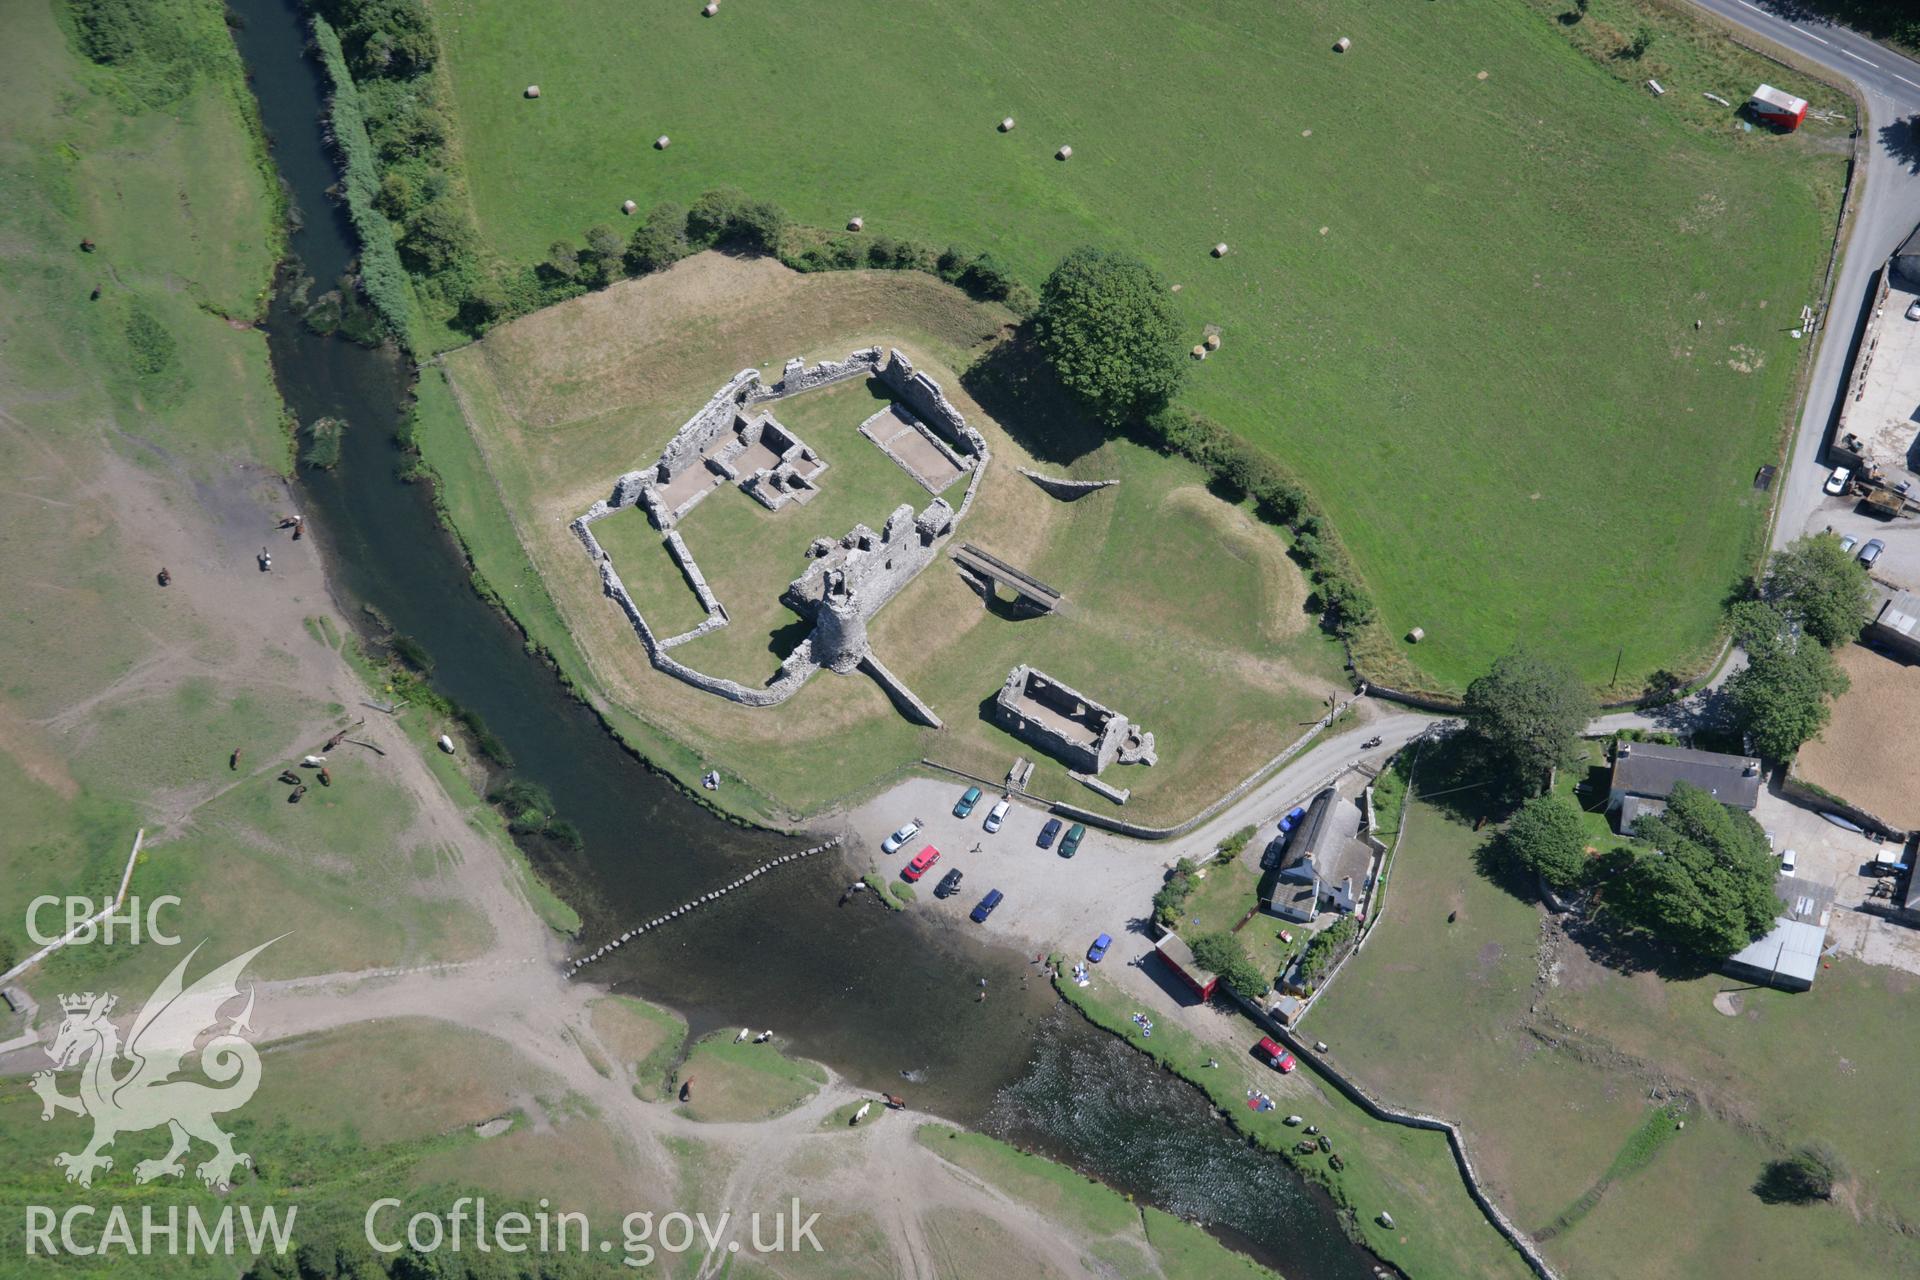 RCAHMW colour oblique aerial photograph of Ogmore Castle. Taken on 24 July 2006 by Toby Driver.